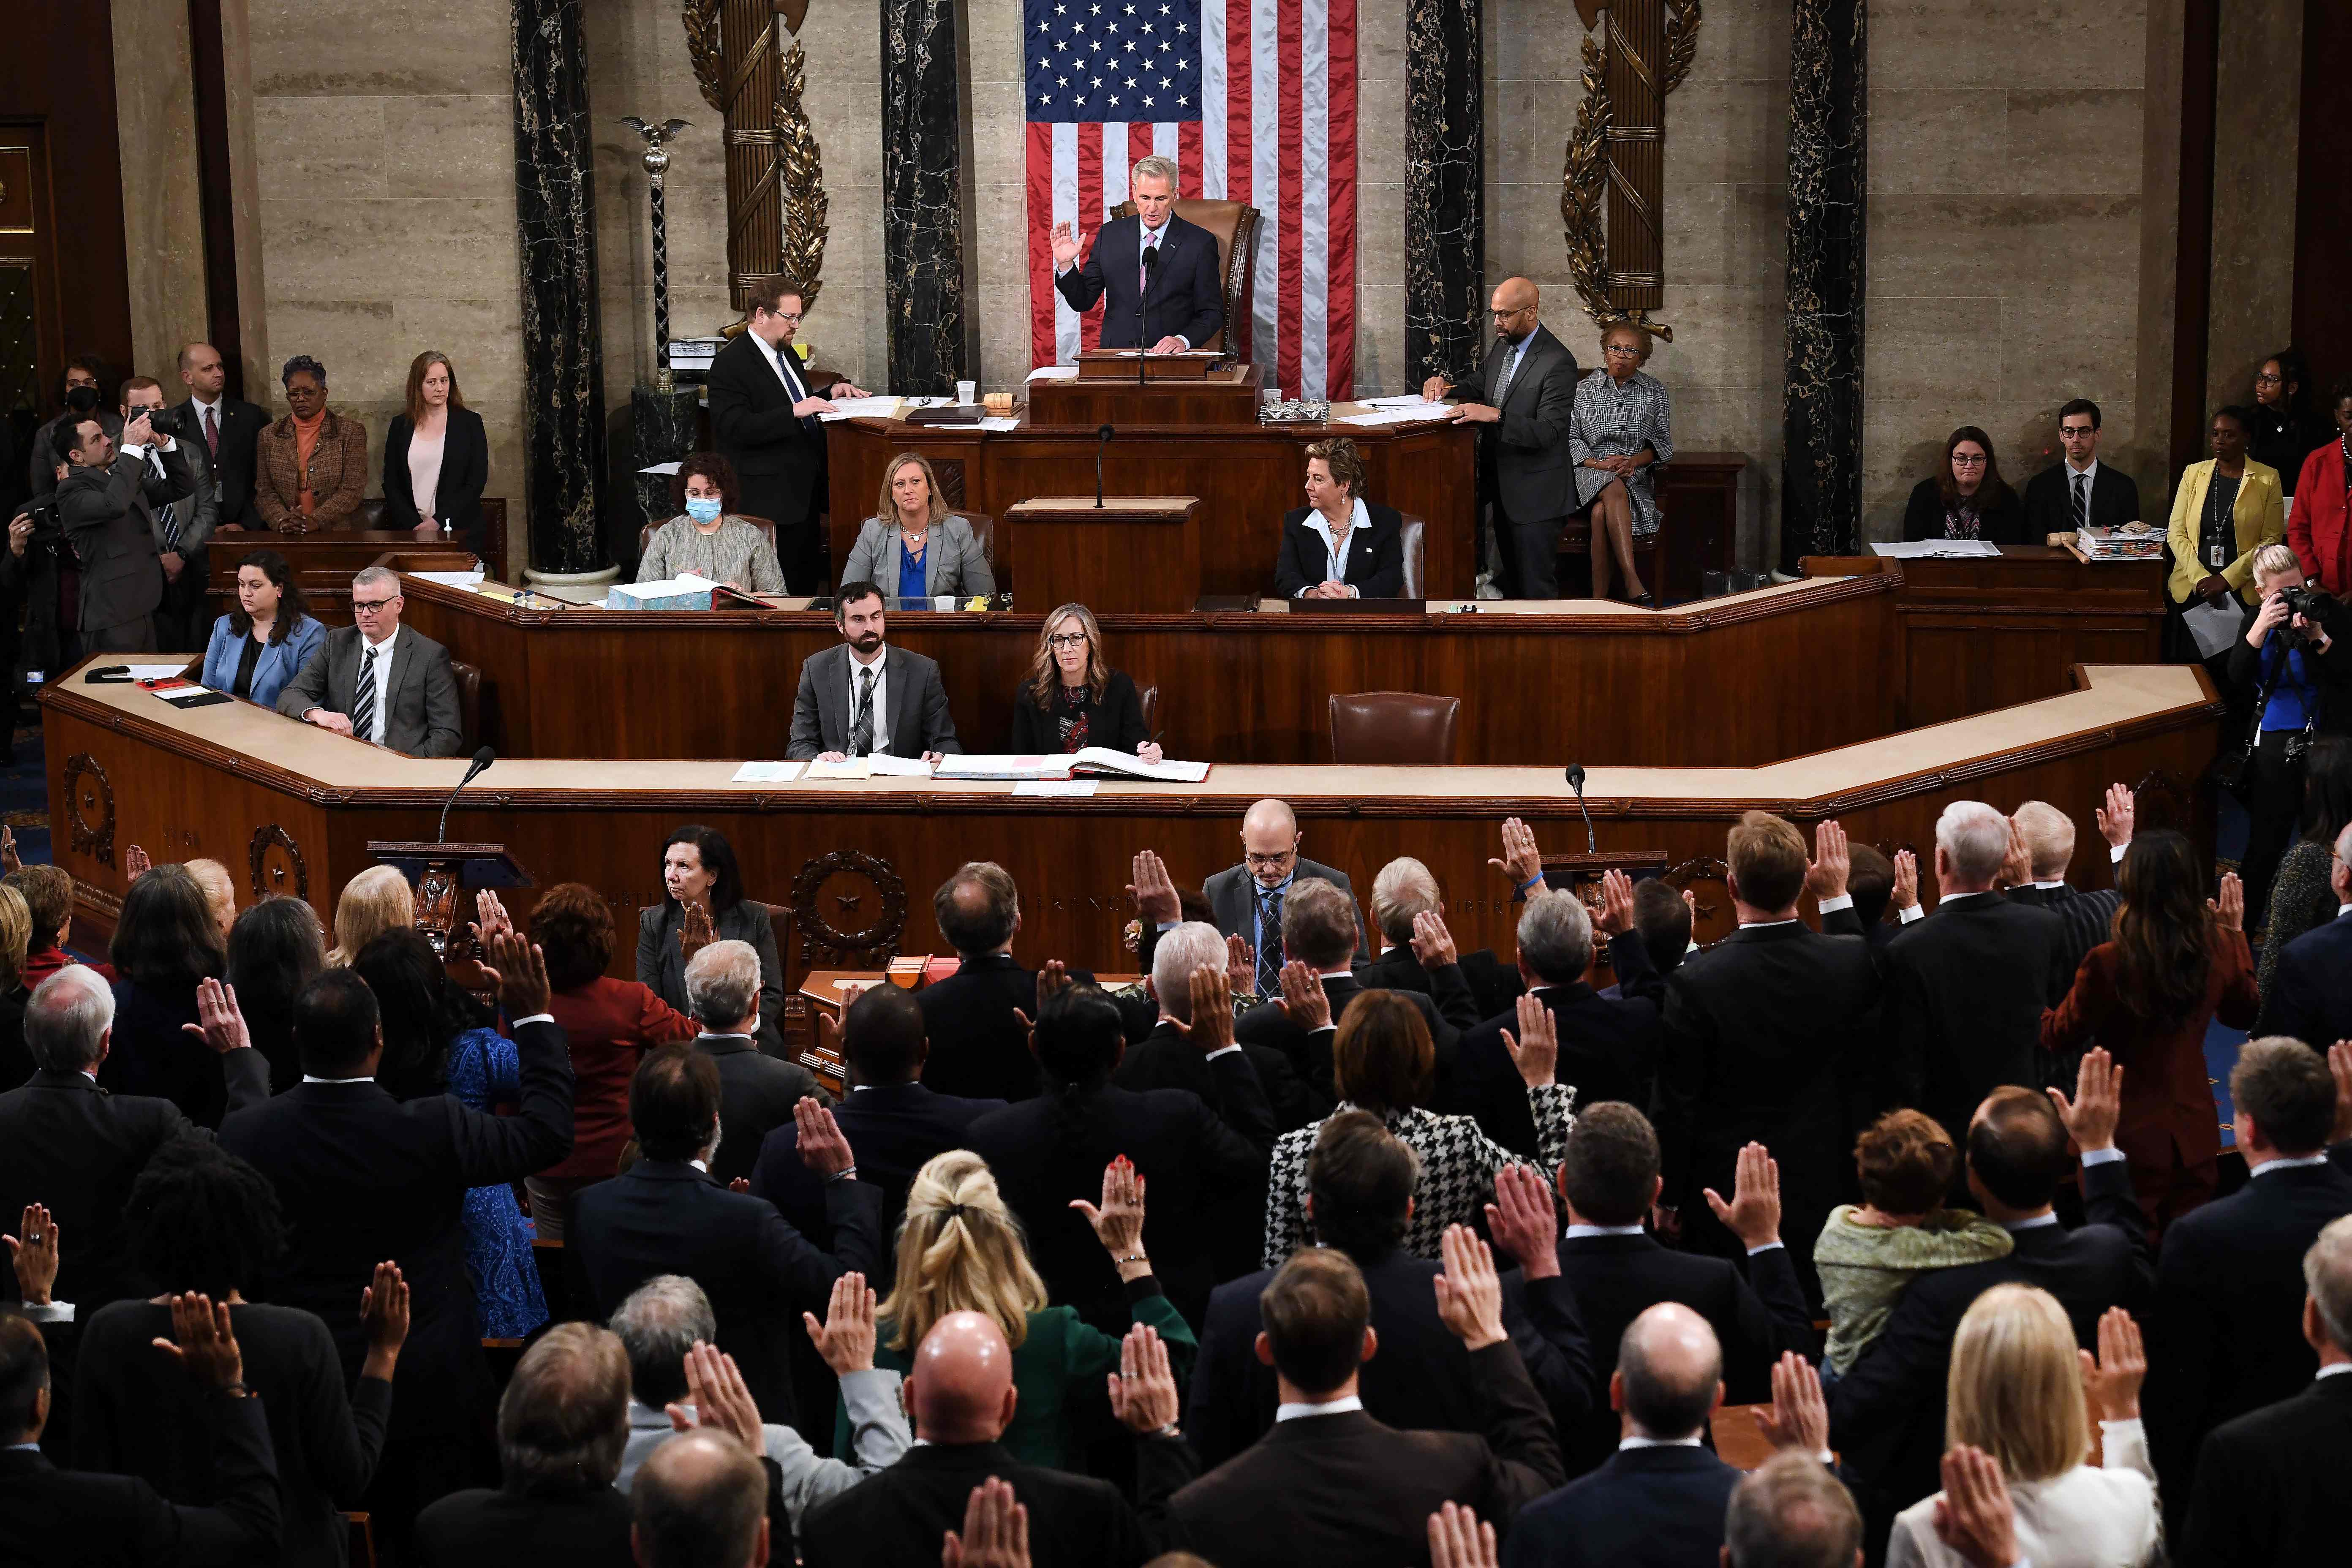 Newly elected speaker of the US House of Representatives Kevin McCarthy swears in the members of the 118th Congress at the US Capitol in Washington, DC, on 7 January 2023